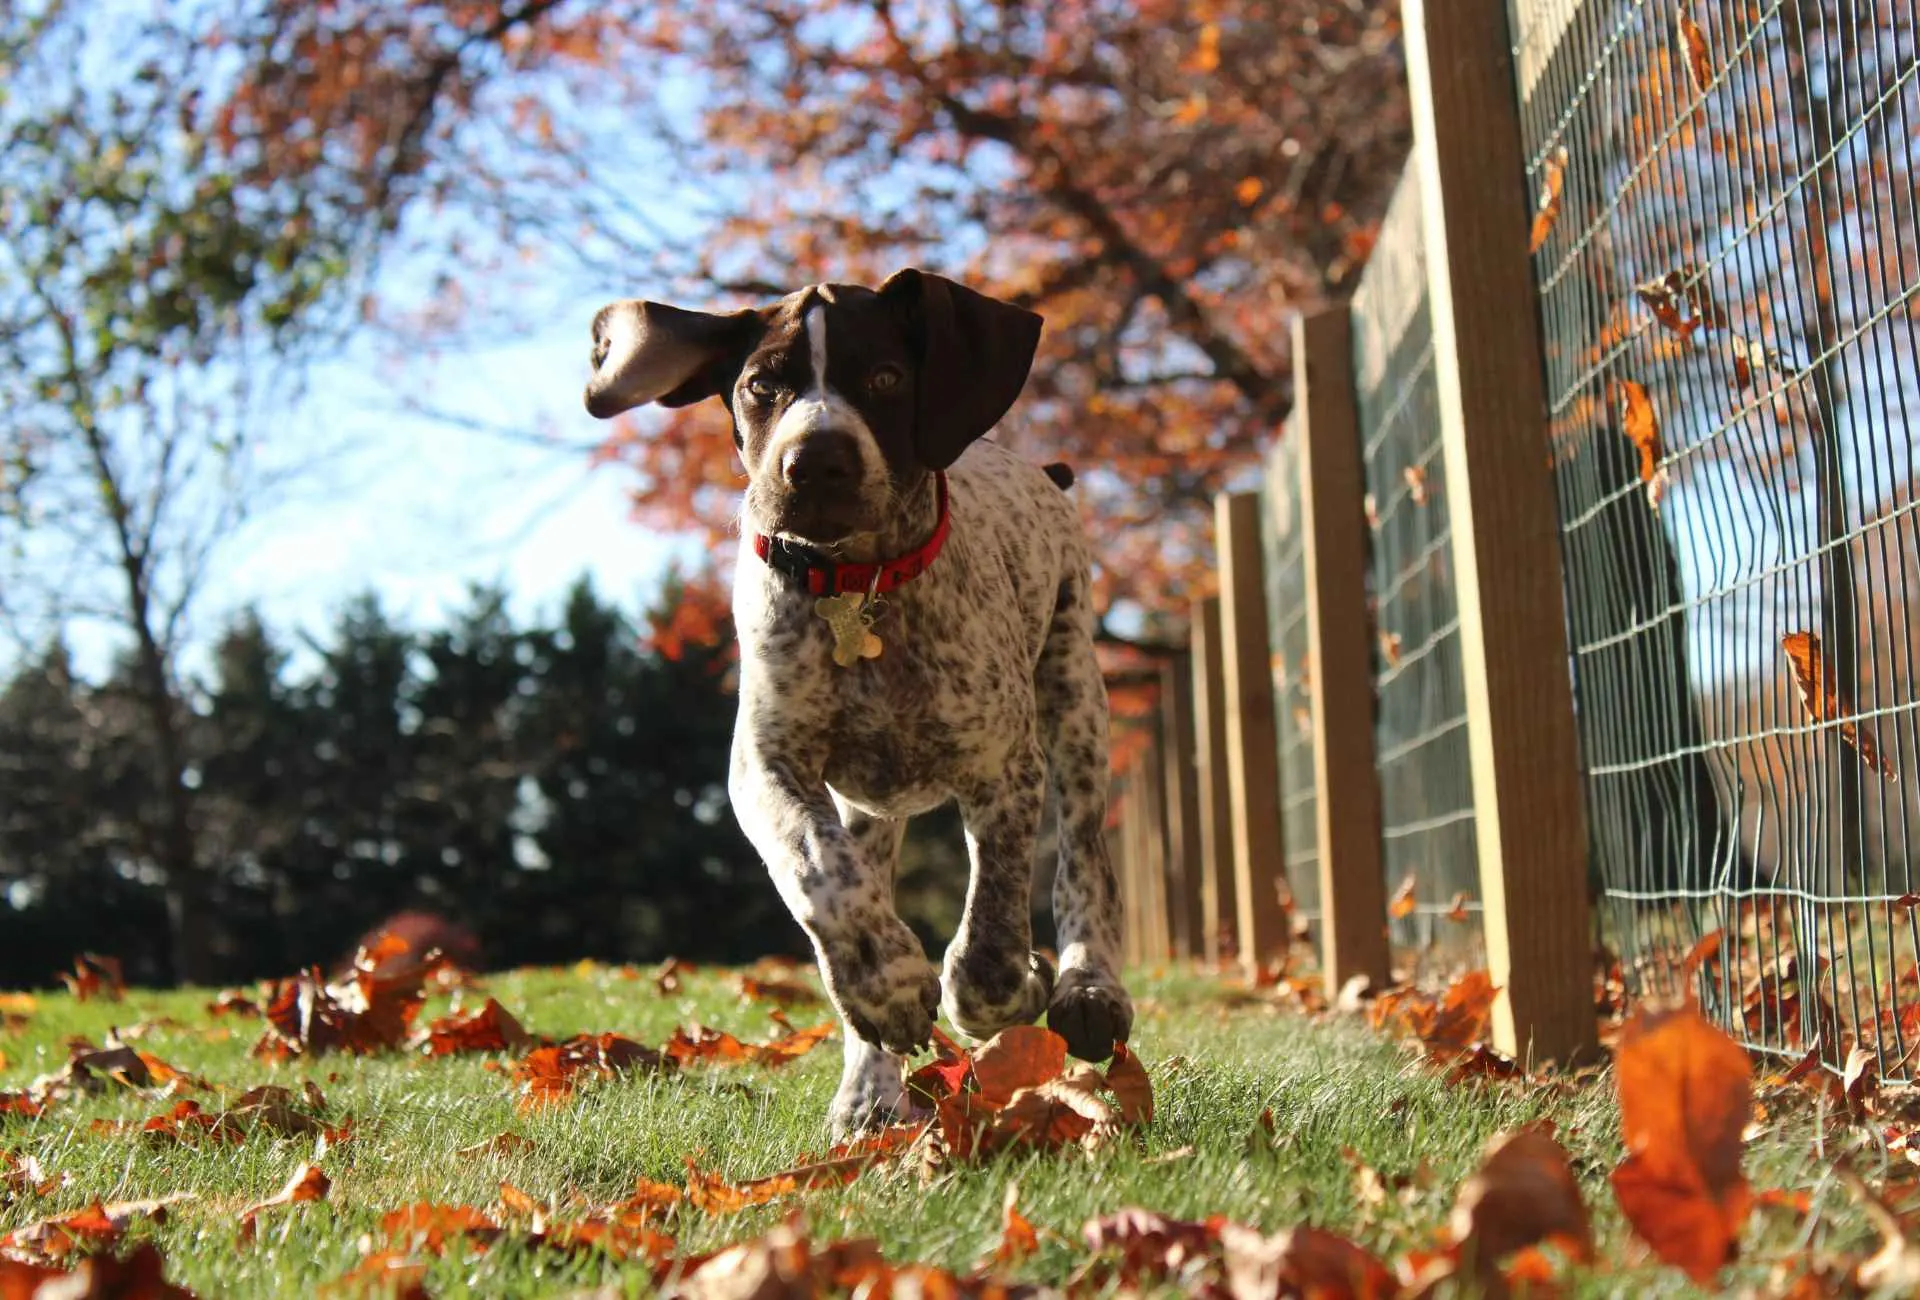 German Shorthaired Pointer puppy running with a fence and leaves in the background.